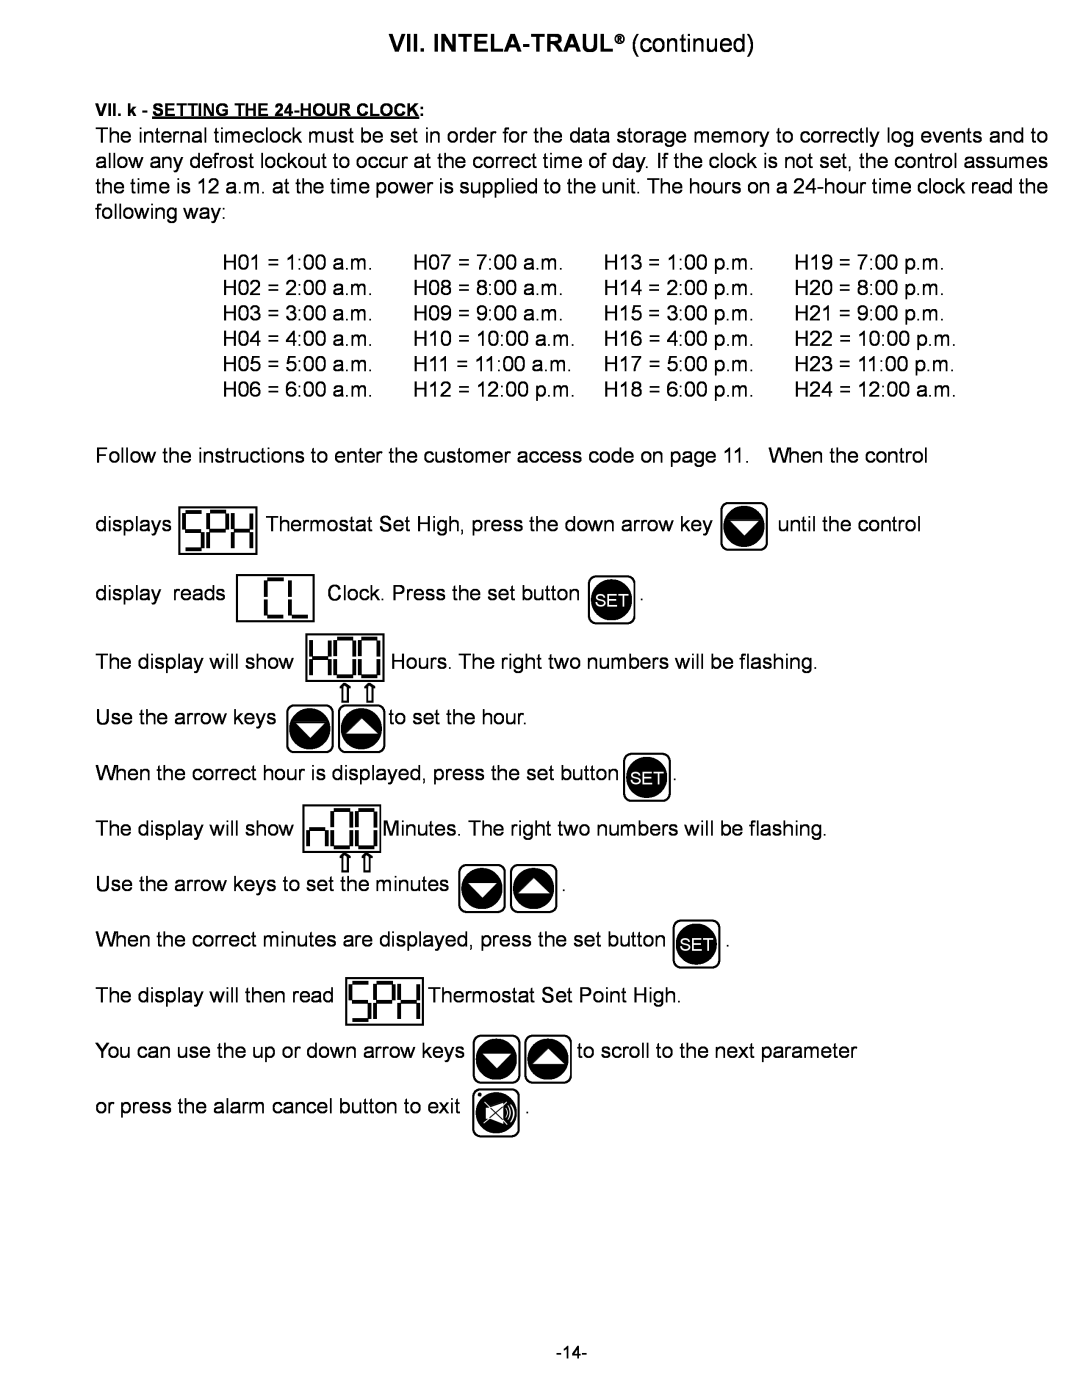 Traulsen R & A Series owner manual VII. INTELA-TRAUL continued, VII. k - SETTING THE 24-HOUR CLOCK 